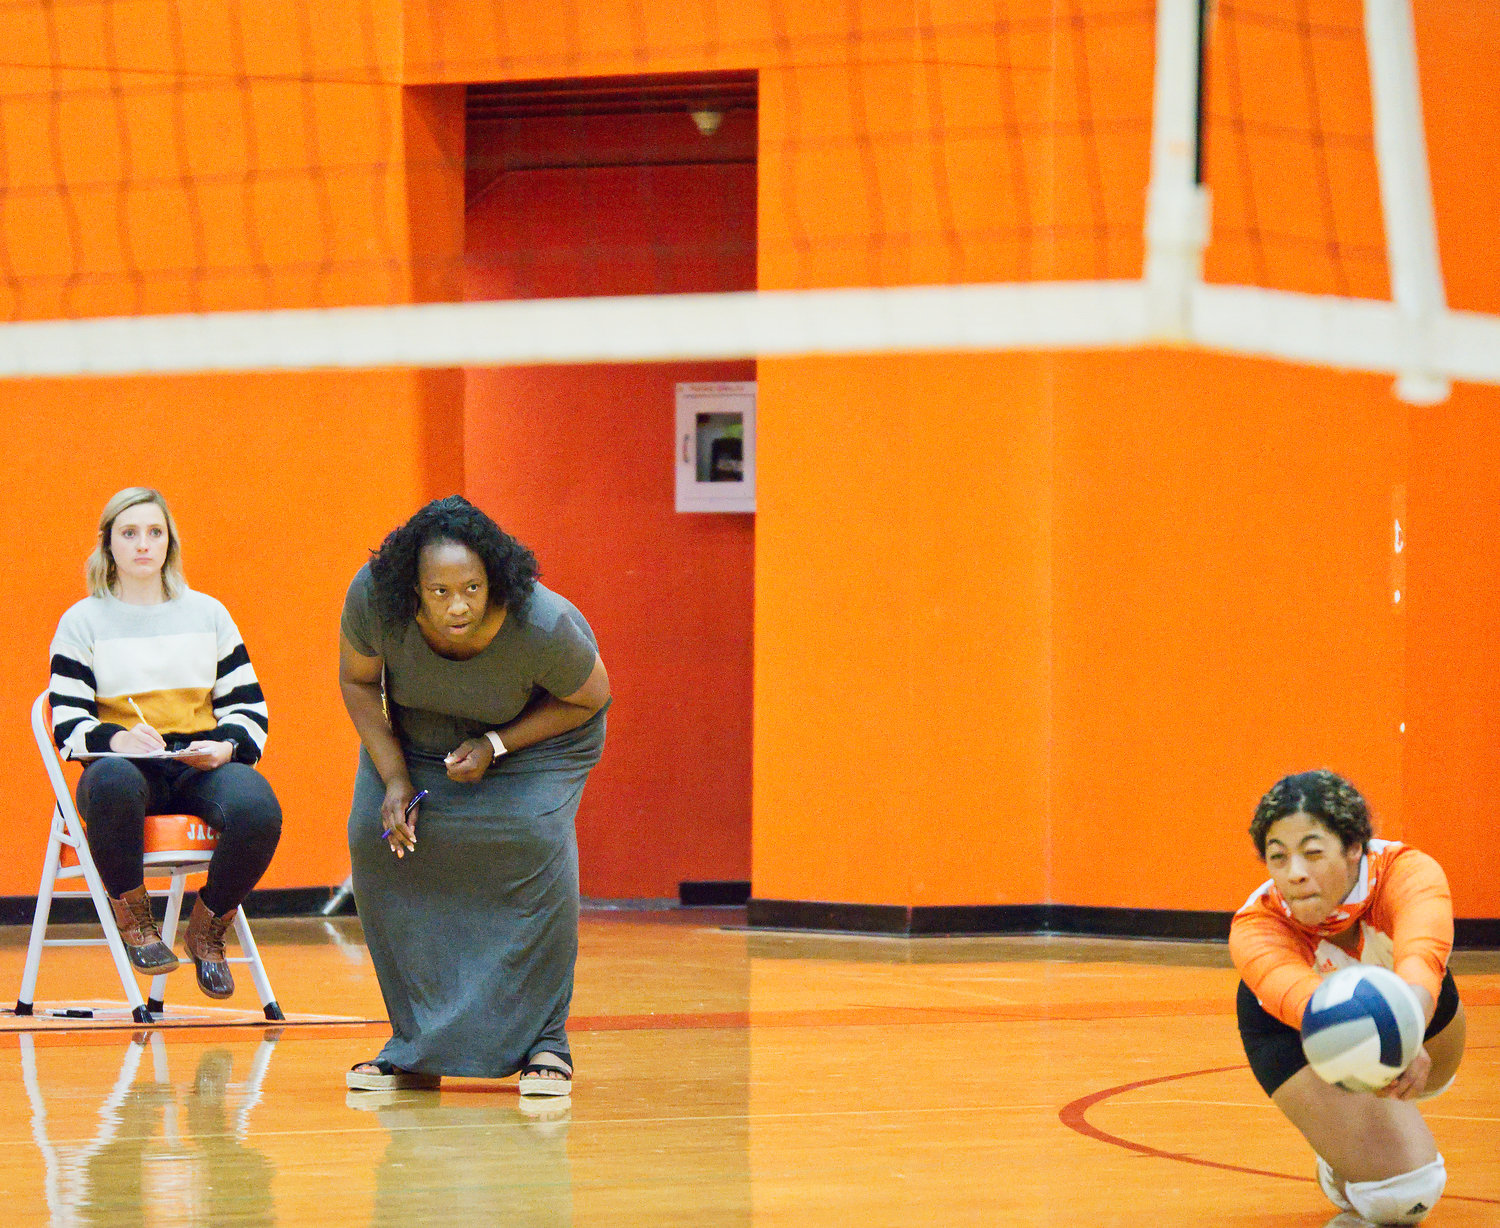 Mineola volleyball coach TaShara Stephens watches intently as Jaiden Gardner dives for a save in Friday’s final regular season match against Mt. Pleasant Chapel Hill. The Lady Jackets lost in four games but had already clinched a spot in the state playoffs.